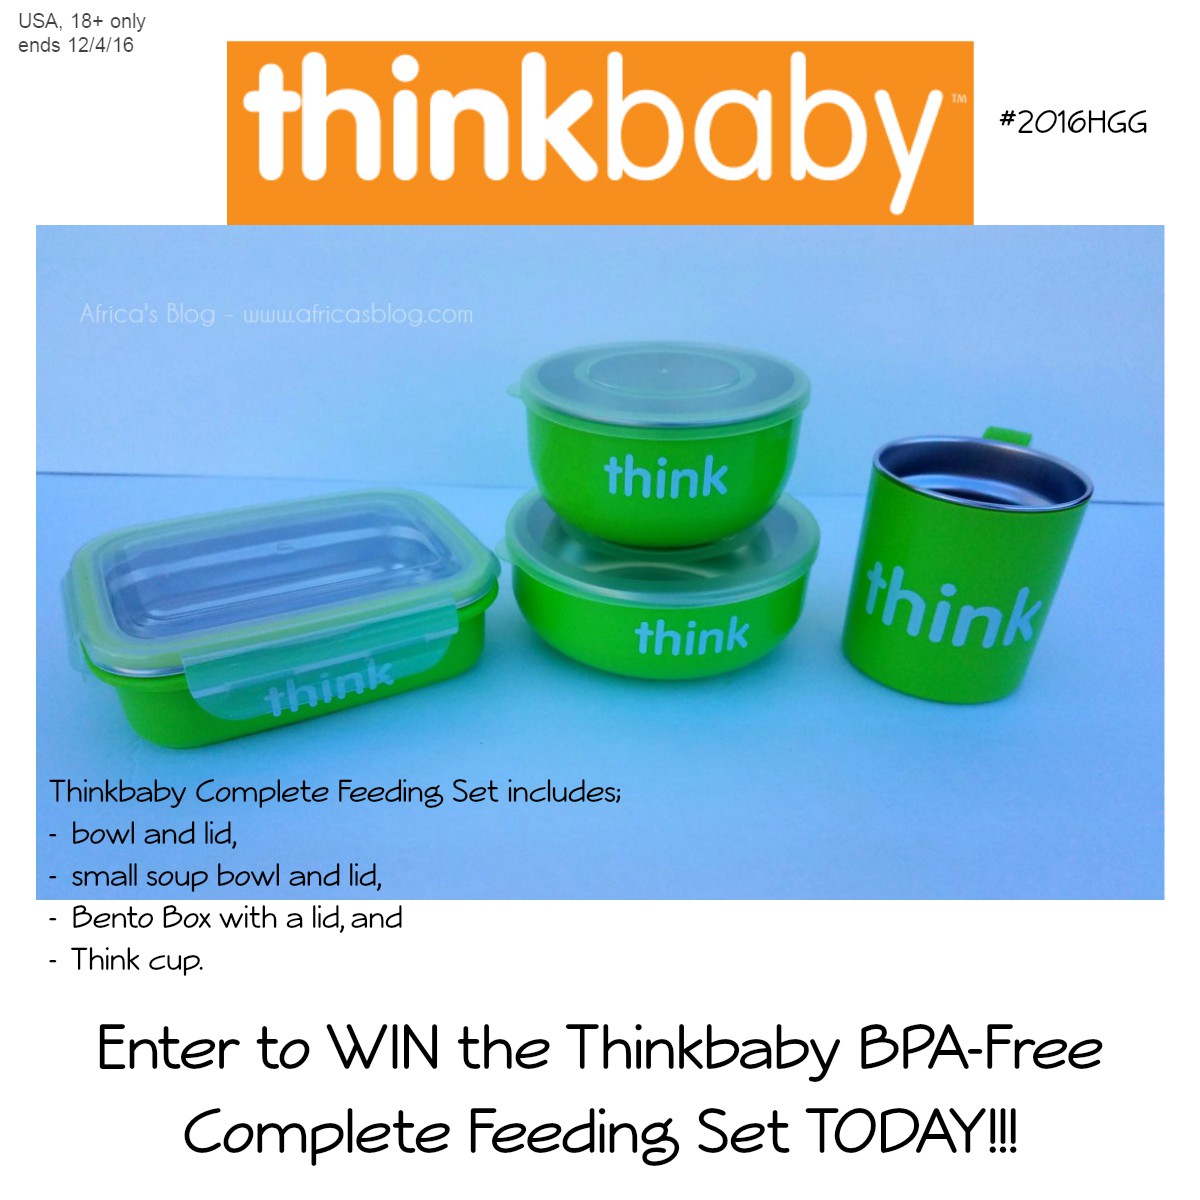 Thinkbaby Complete BPA Free Feeding Set Giveaway!! #2016HGG (ends 12/4)